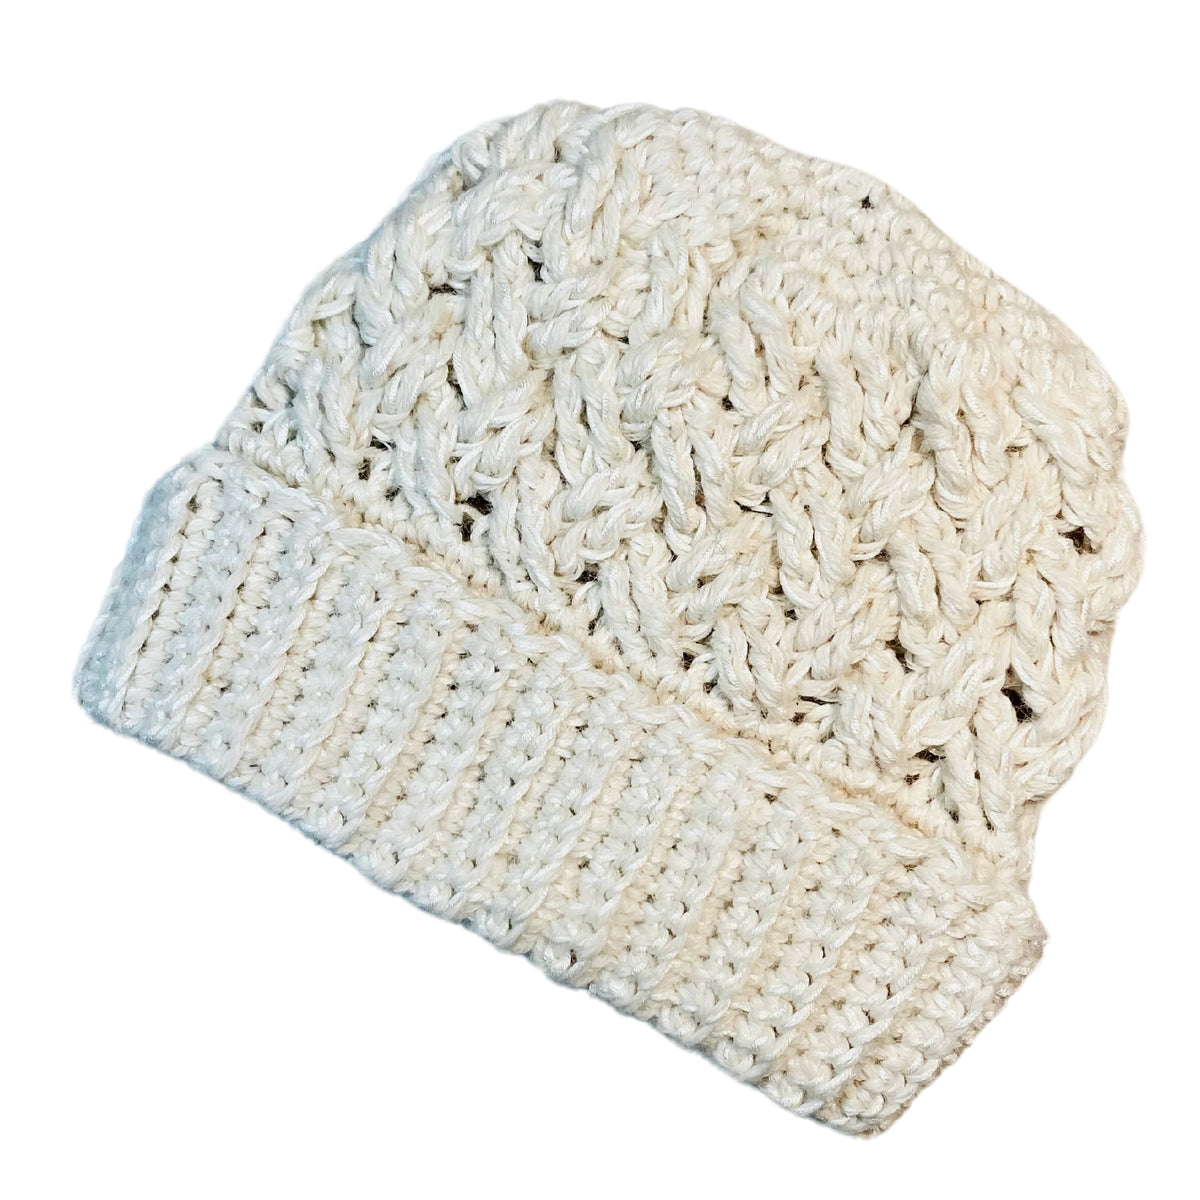 Natural white color cozy soft warm handmade knitted crochet celtic hat made in Montana by Alpacas of Montana.